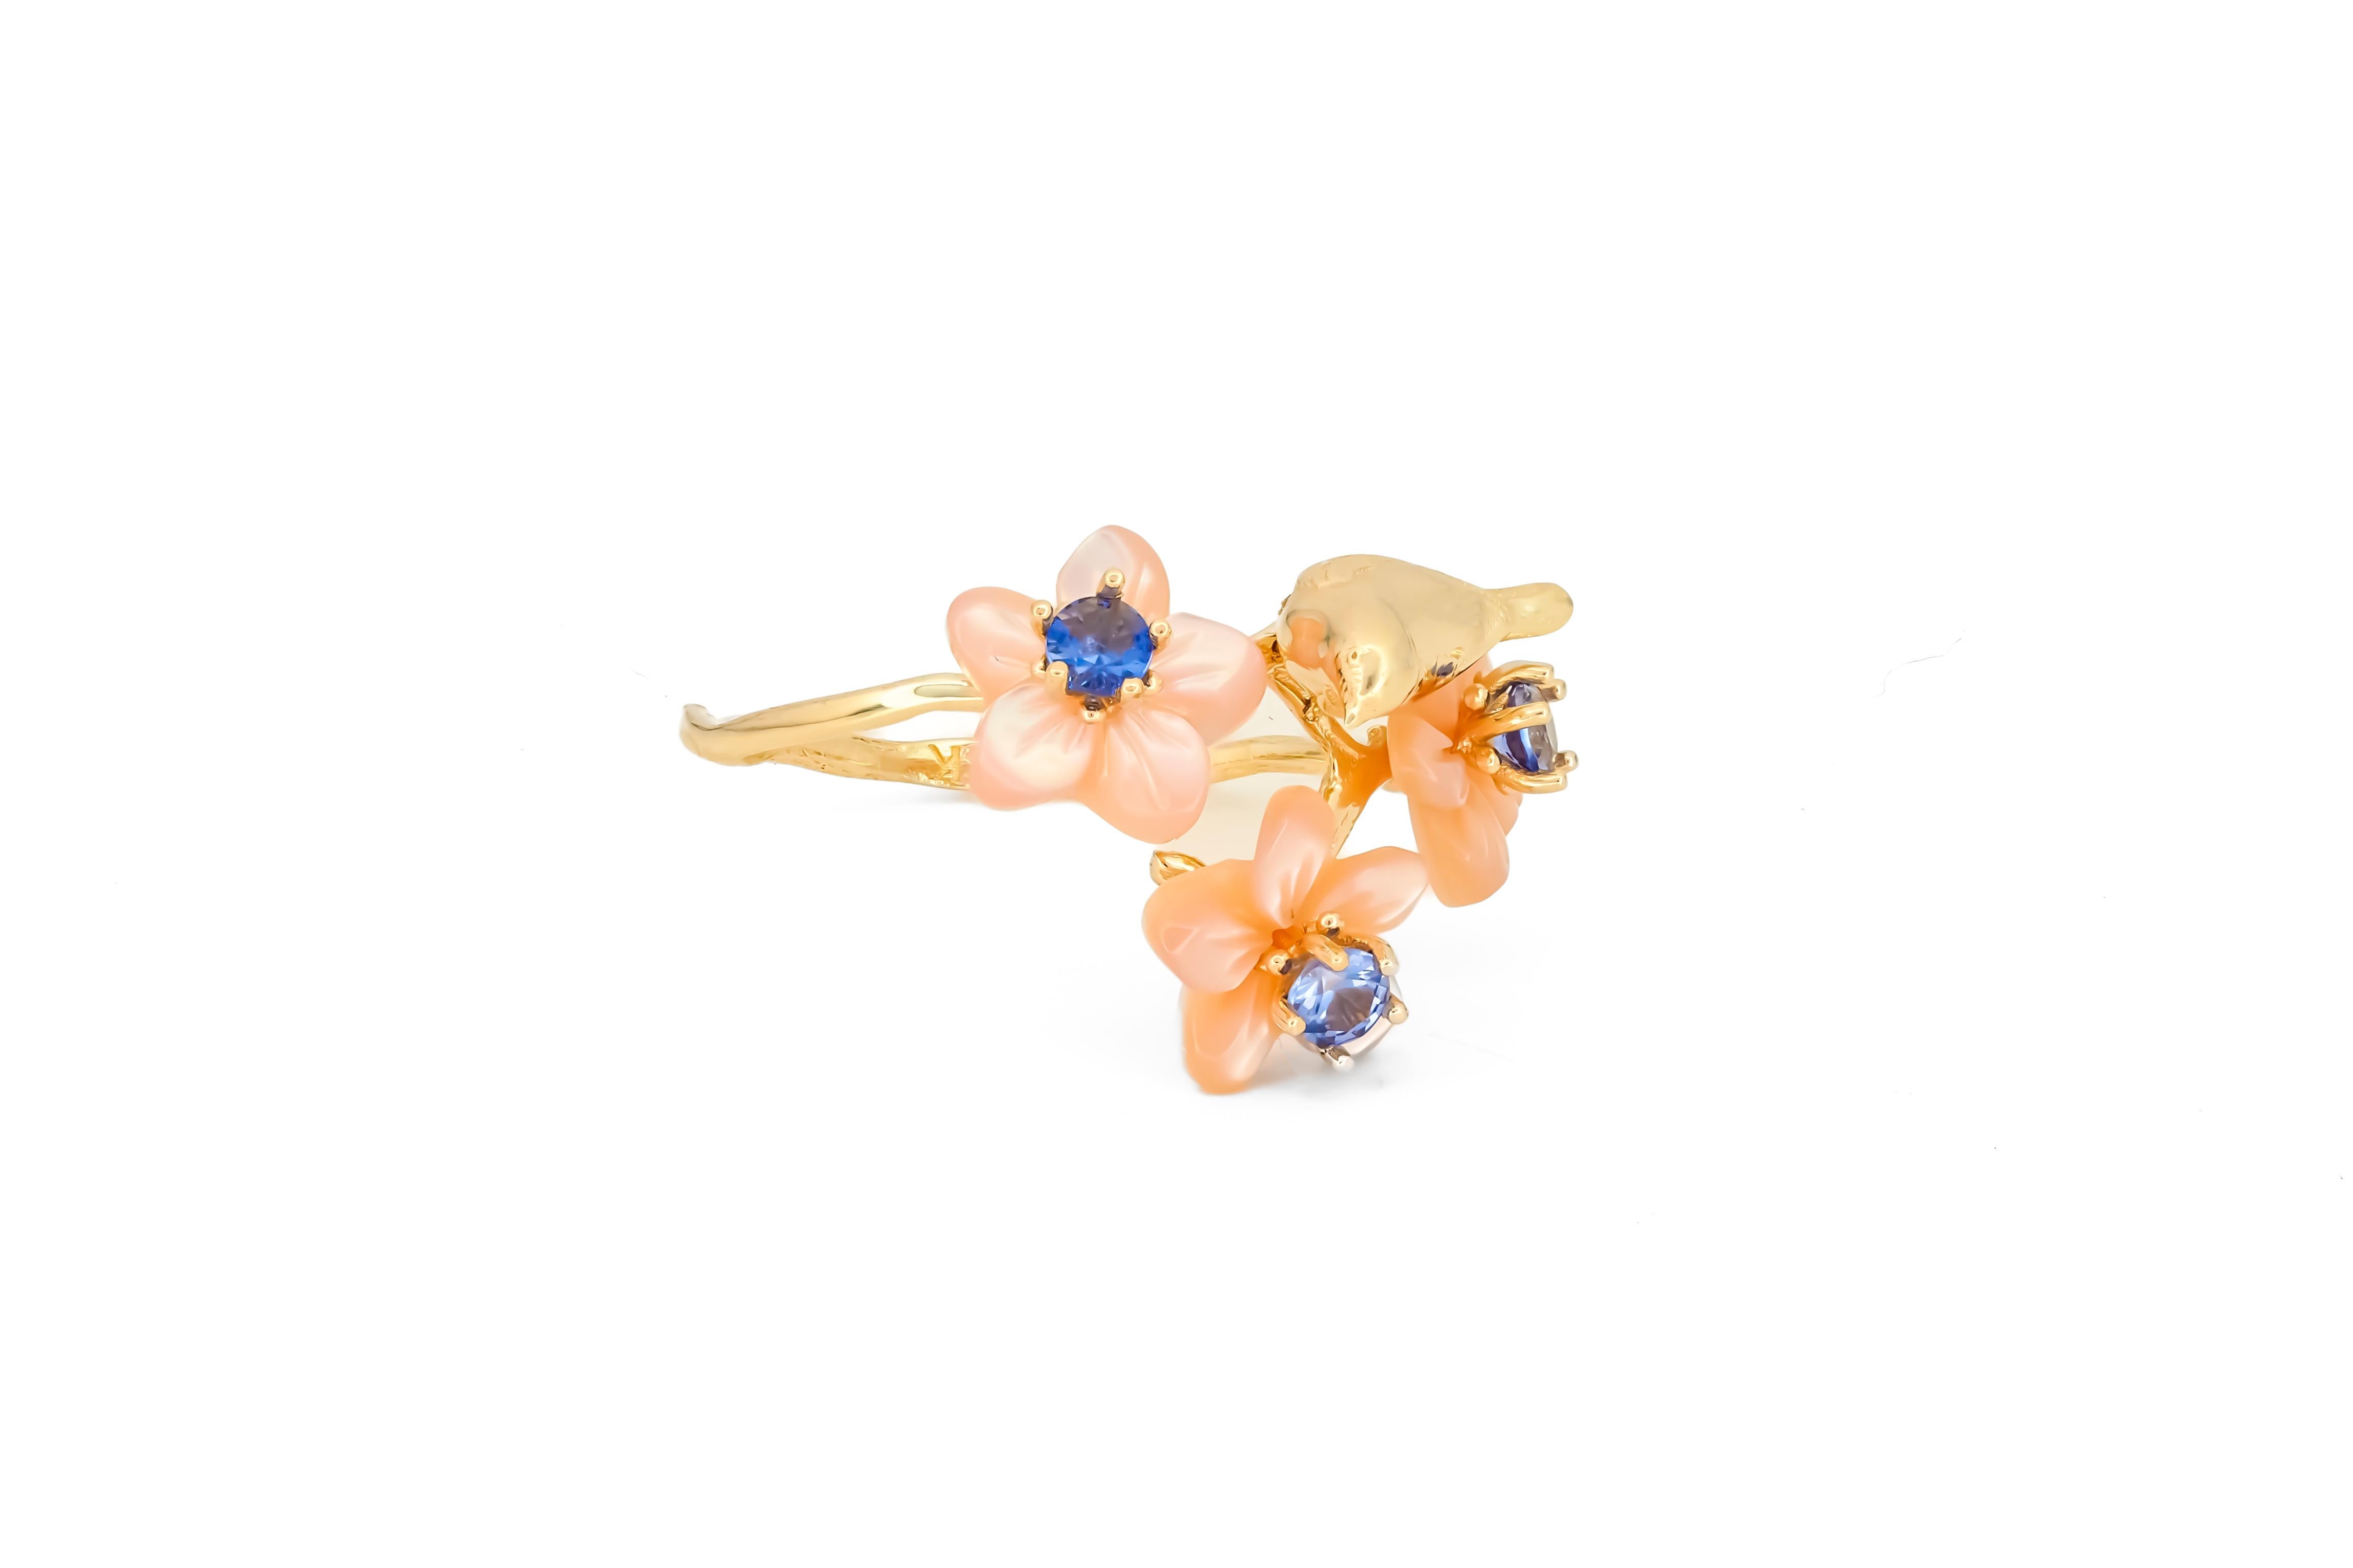 For Sale:  14k Gold Bird on Branch Ring. Sapphires and Carved Mother of Pearl ring! 3